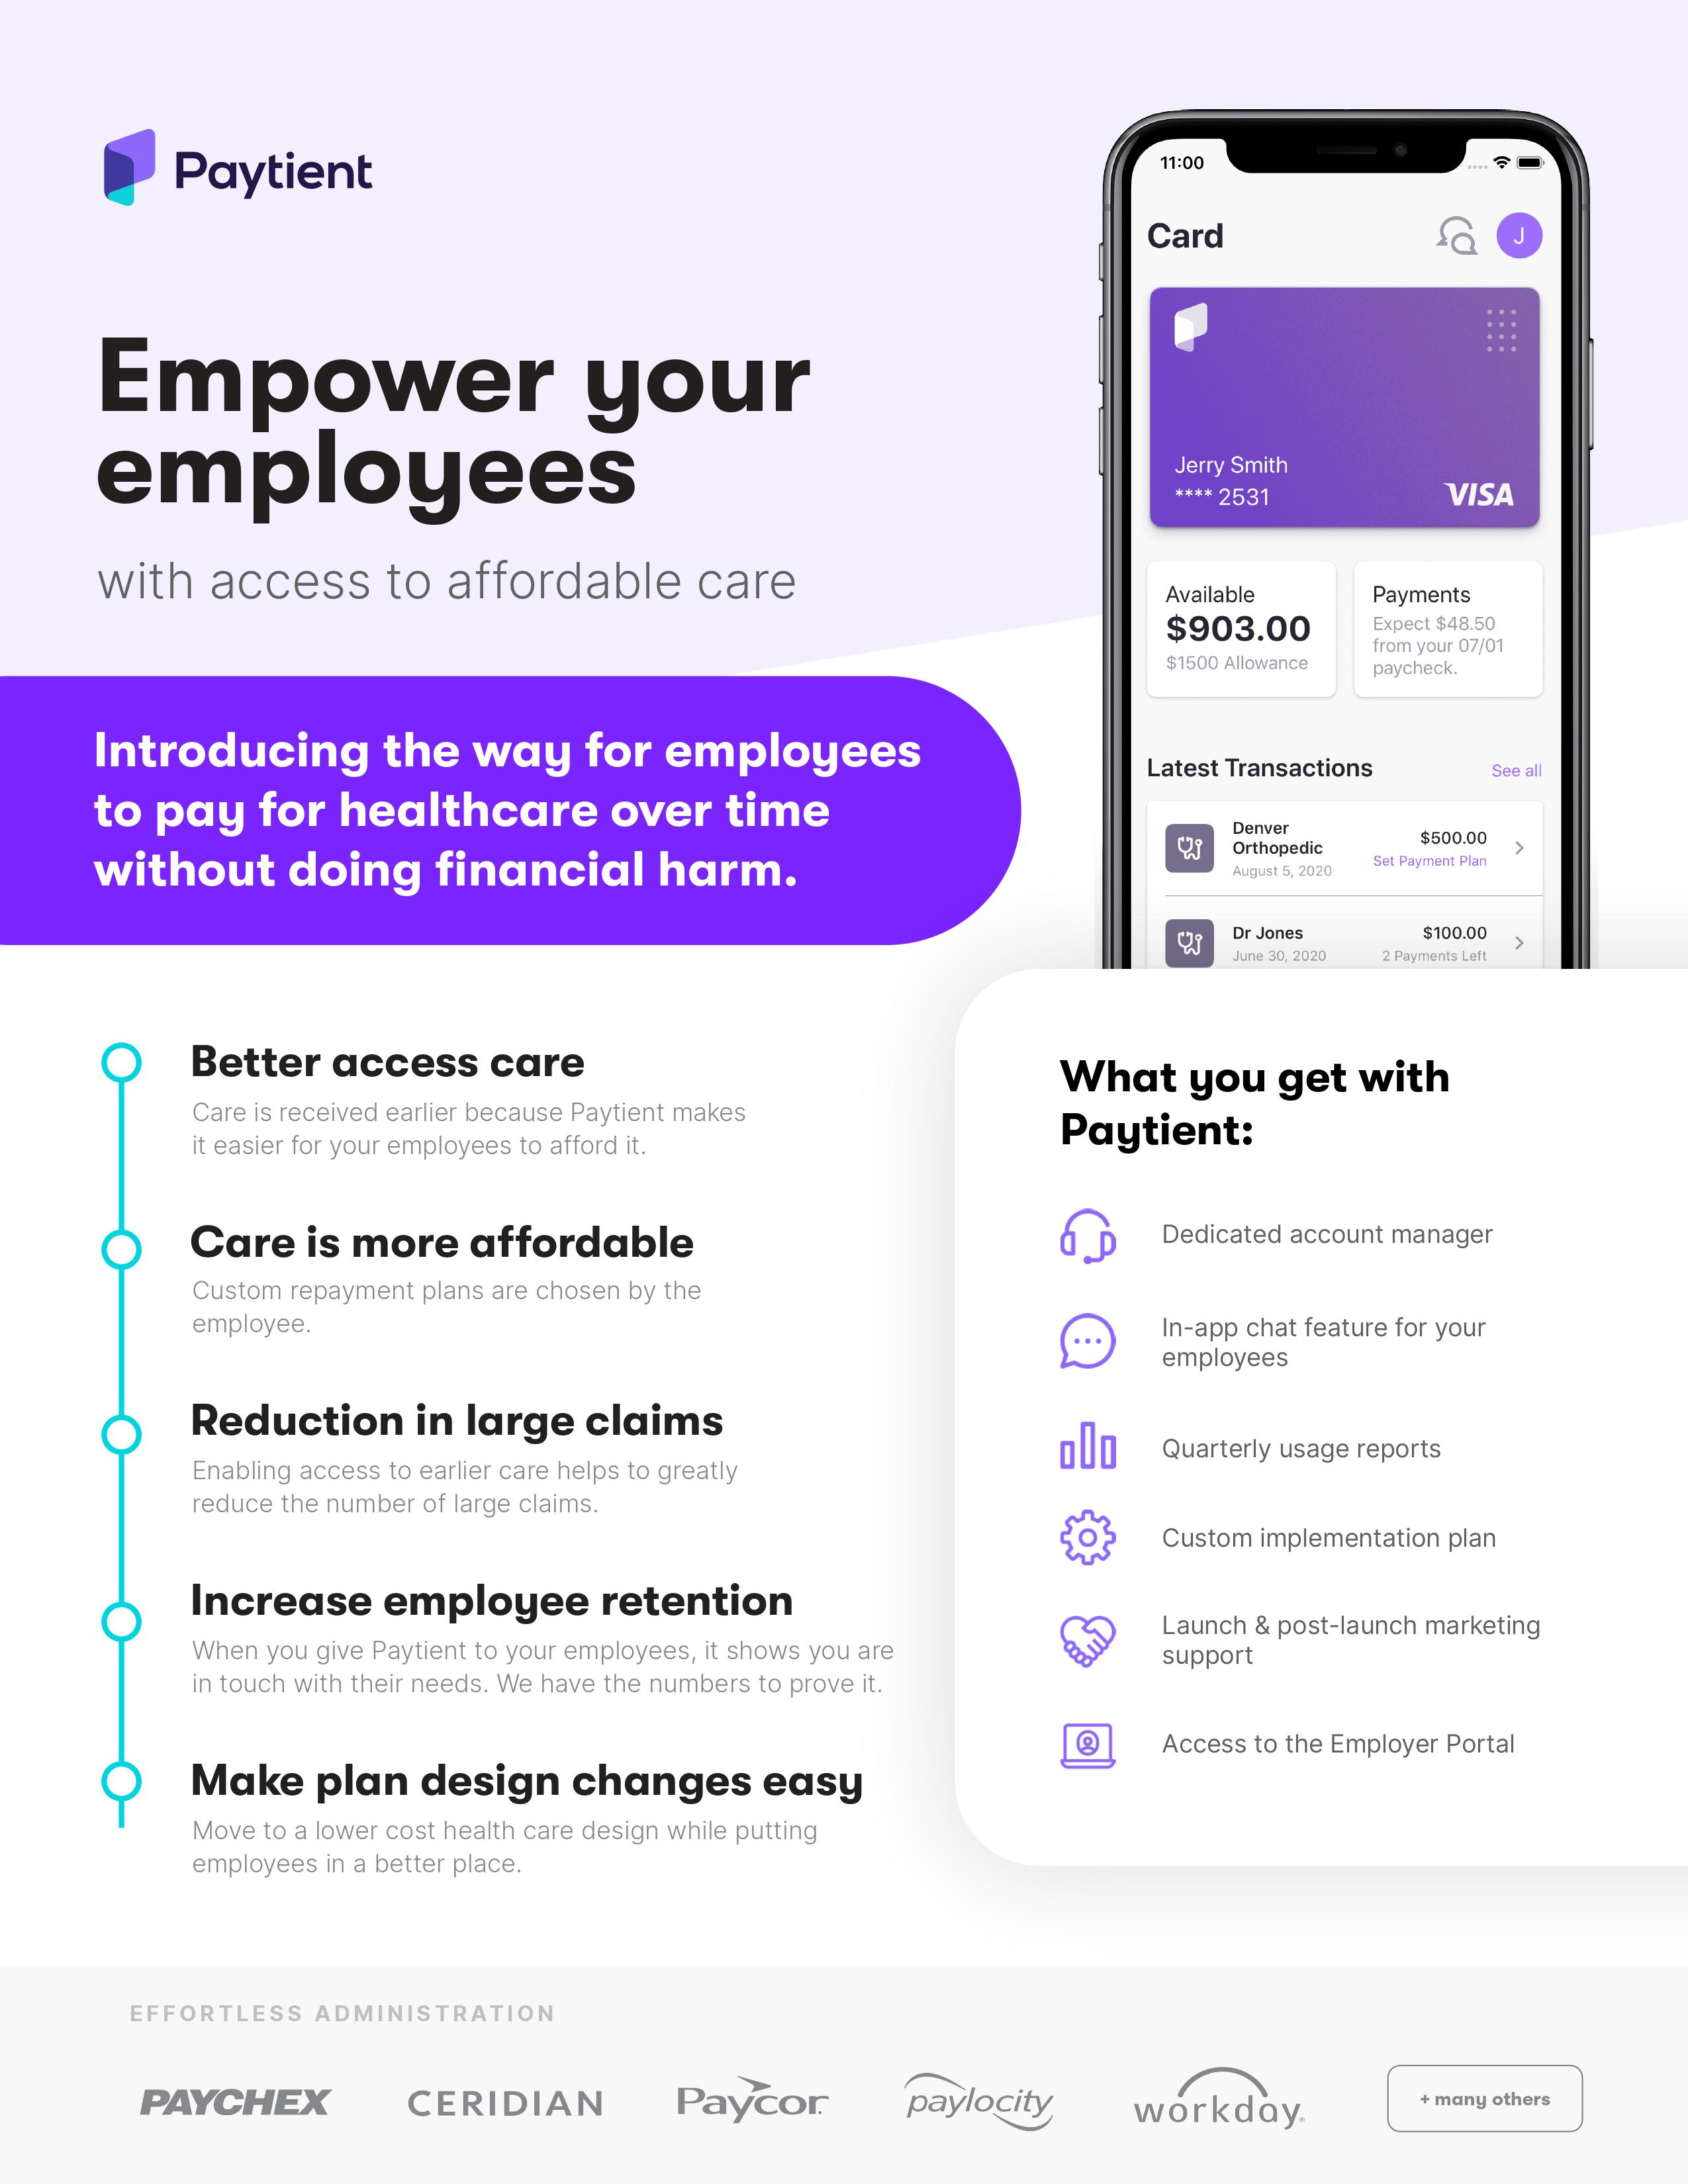 Empower your employees